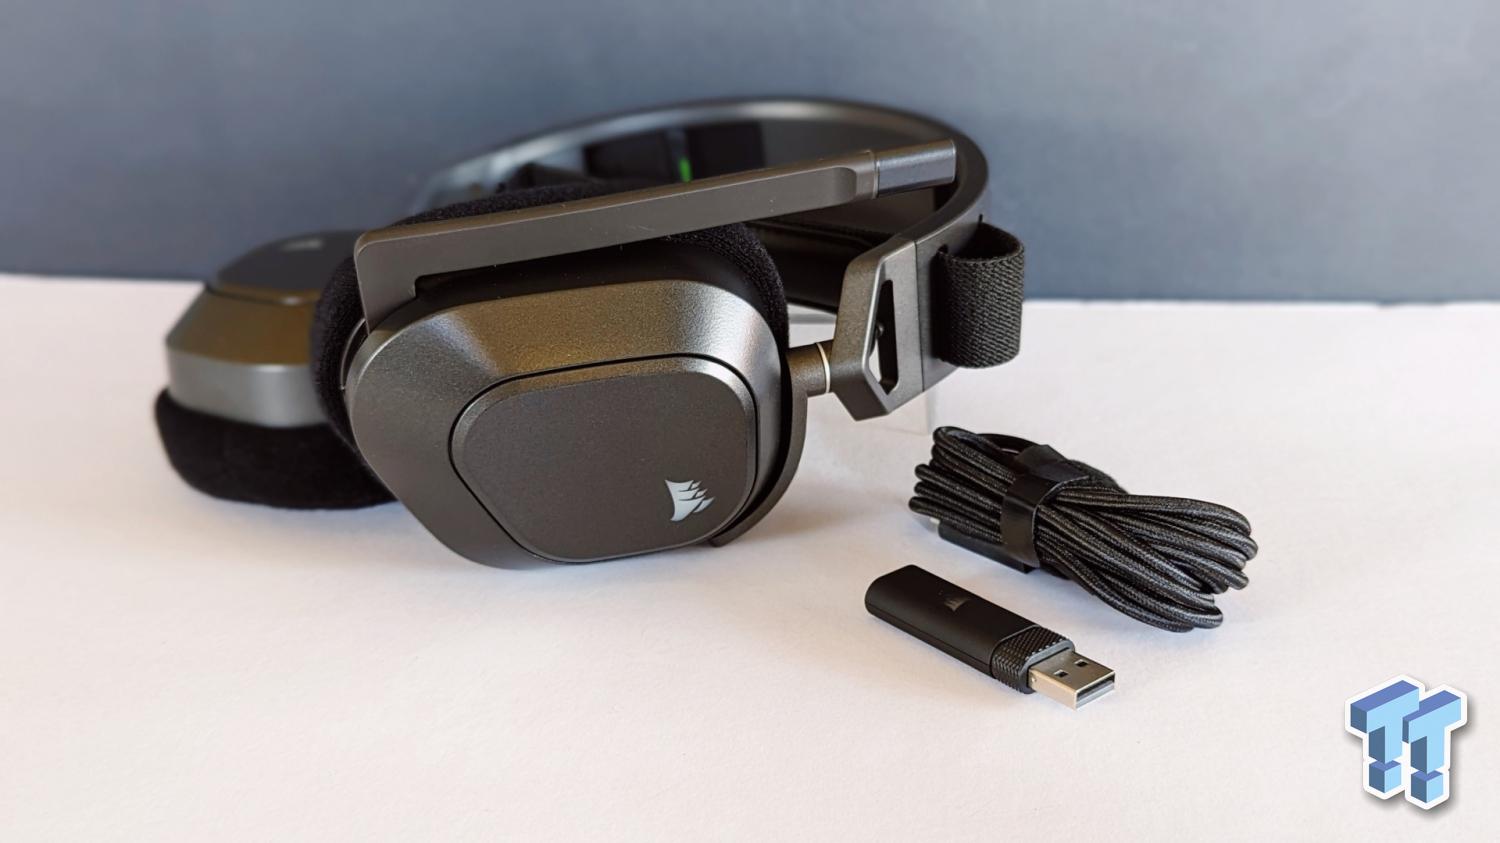 Corsair HS80 Max Wireless Headset review